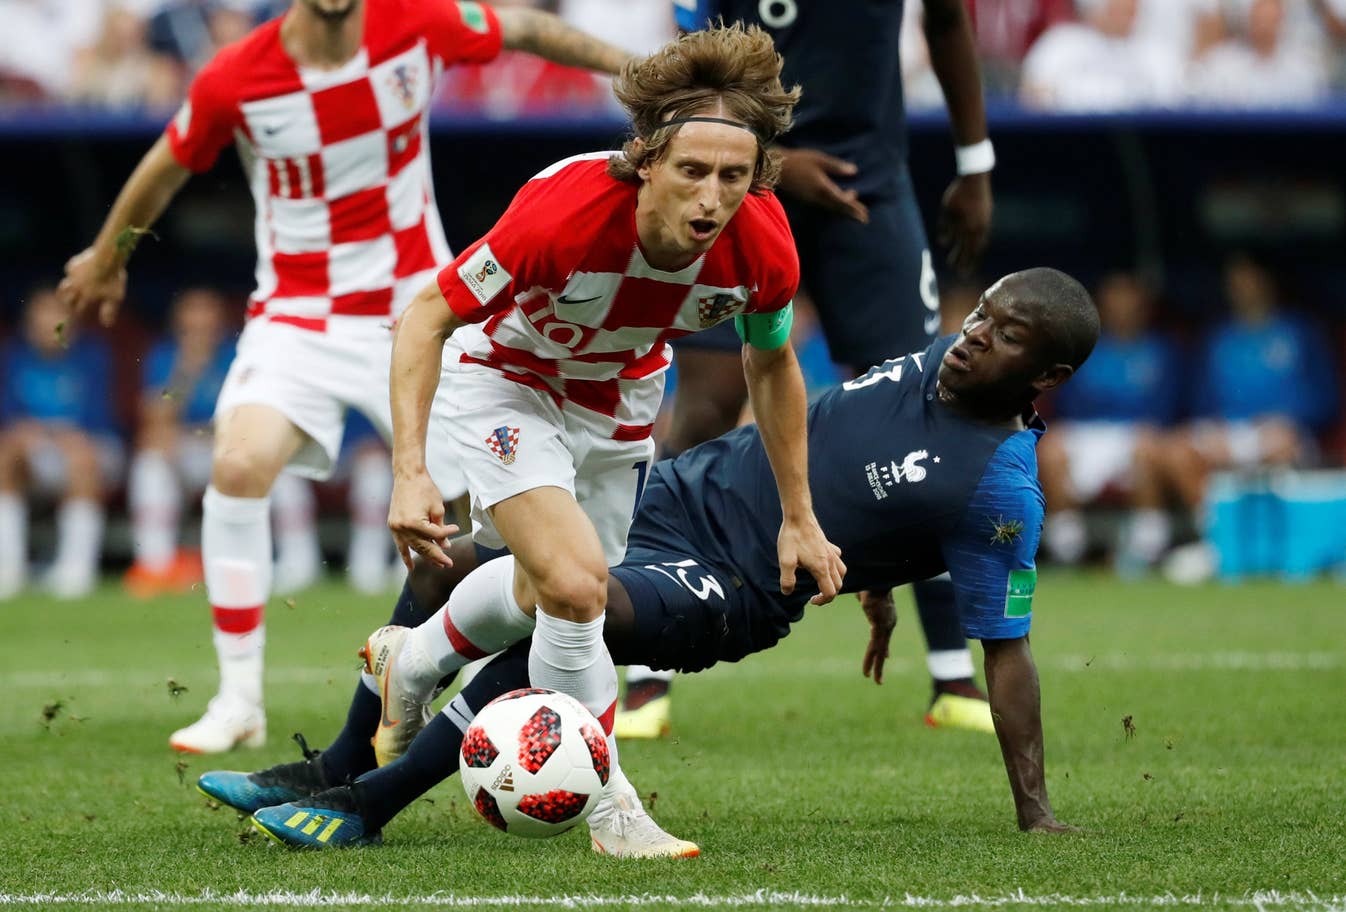 https://static.independent.co.uk/s3fs-public/thumbnails/image/2018/07/15/16/world-cup-final-11.jpg?width=1368&height=912&fit=bounds&format=pjpg&auto=webp&quality=70